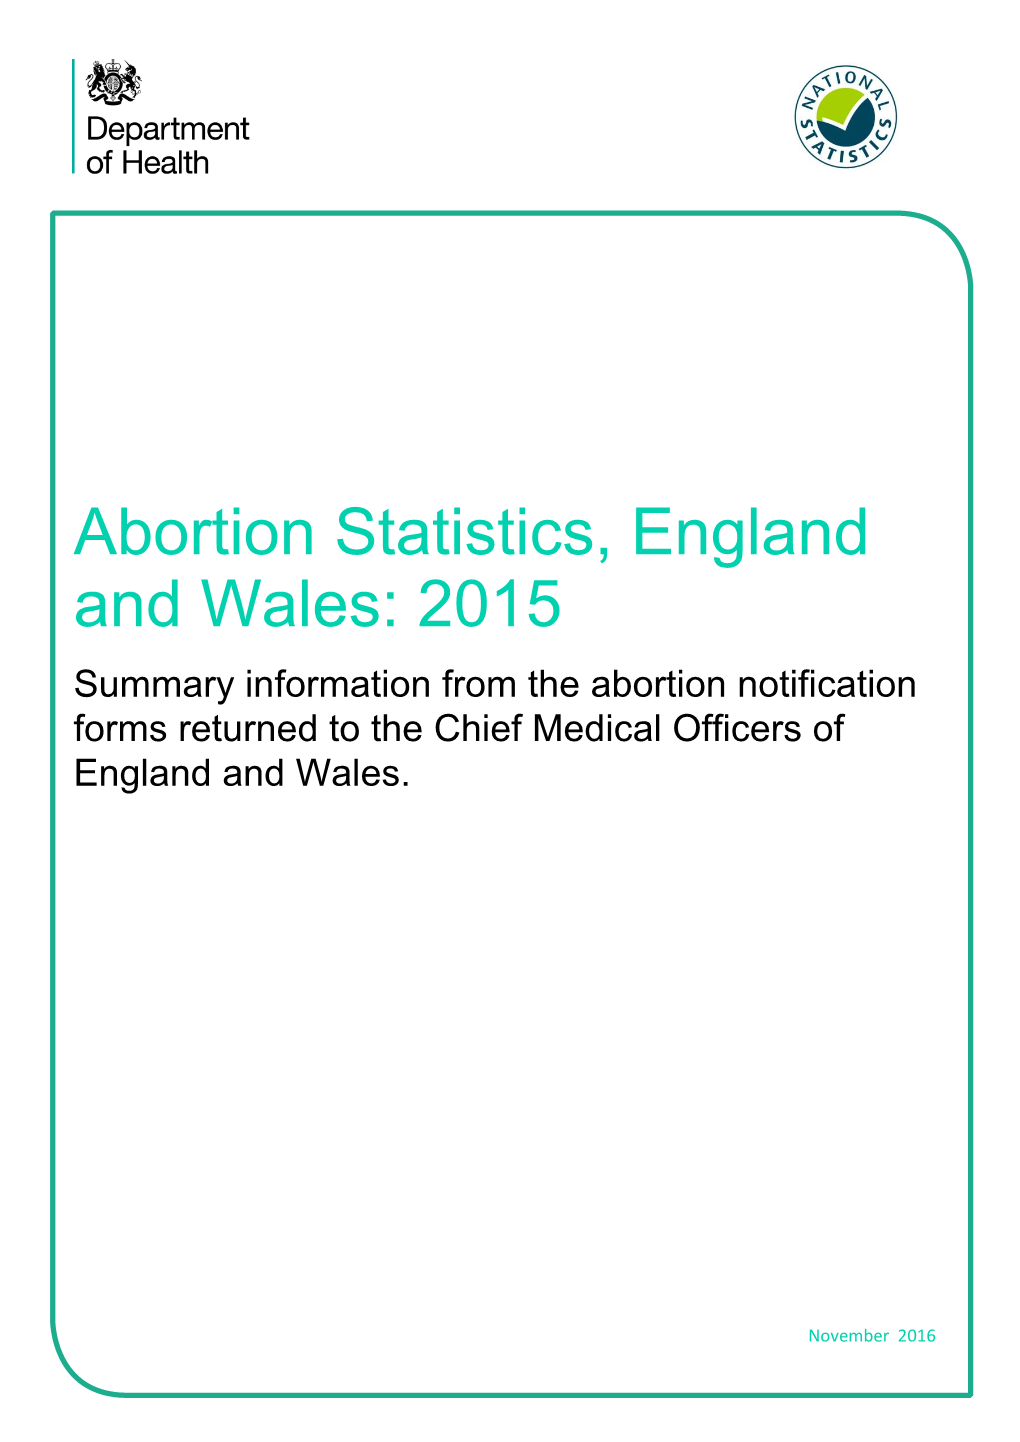 Abortion Statistics, England and Wales: 2015 Summary Information from the Abortion Notification Forms Returned to the Chief Medical Officers of England and Wales